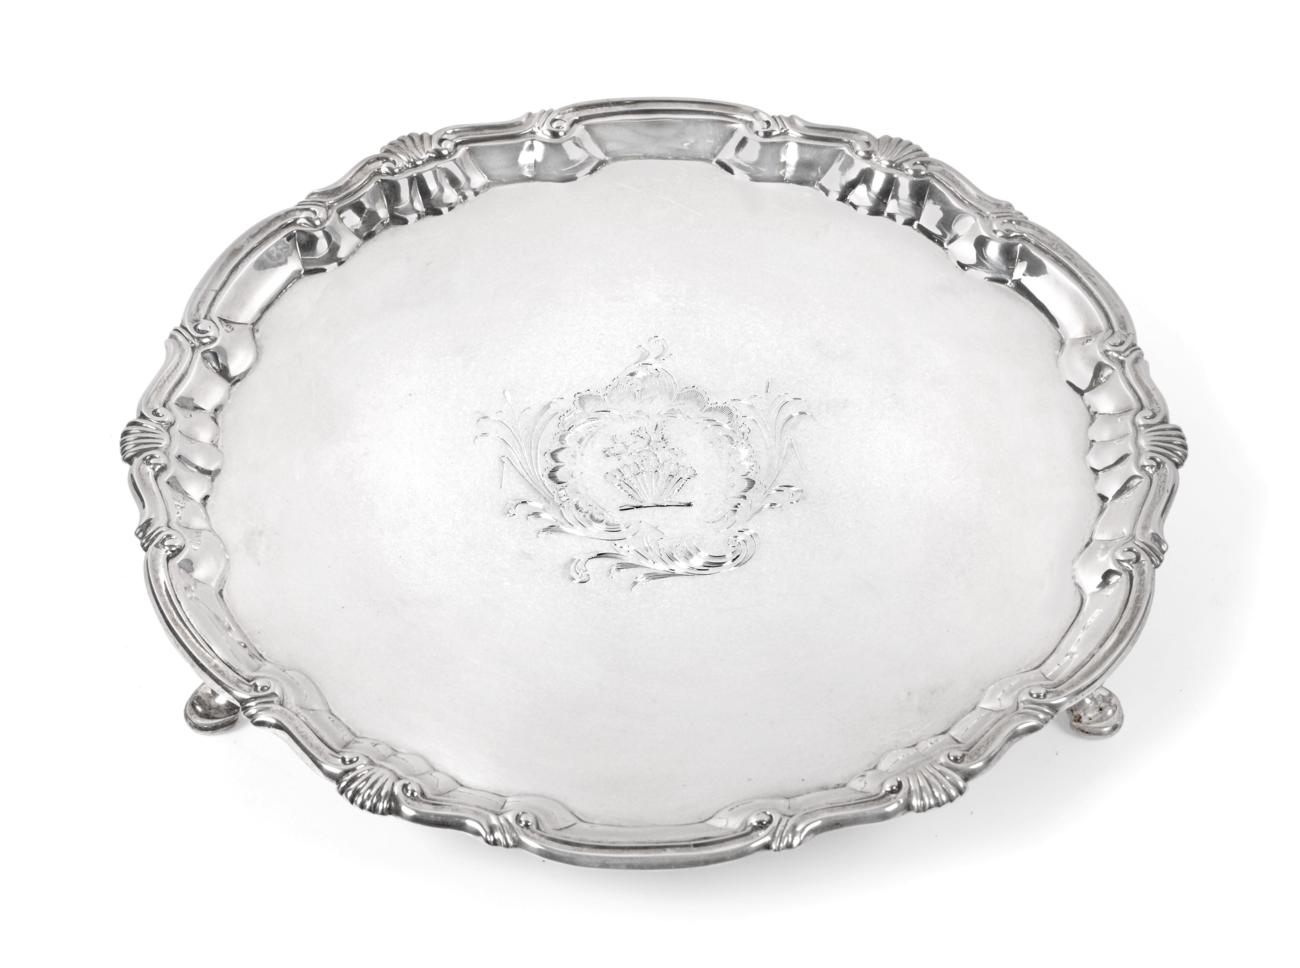 Lot 75 - A George II Silver Salver, by William Peaston, London, 1746, shaped circular and on three pad feet